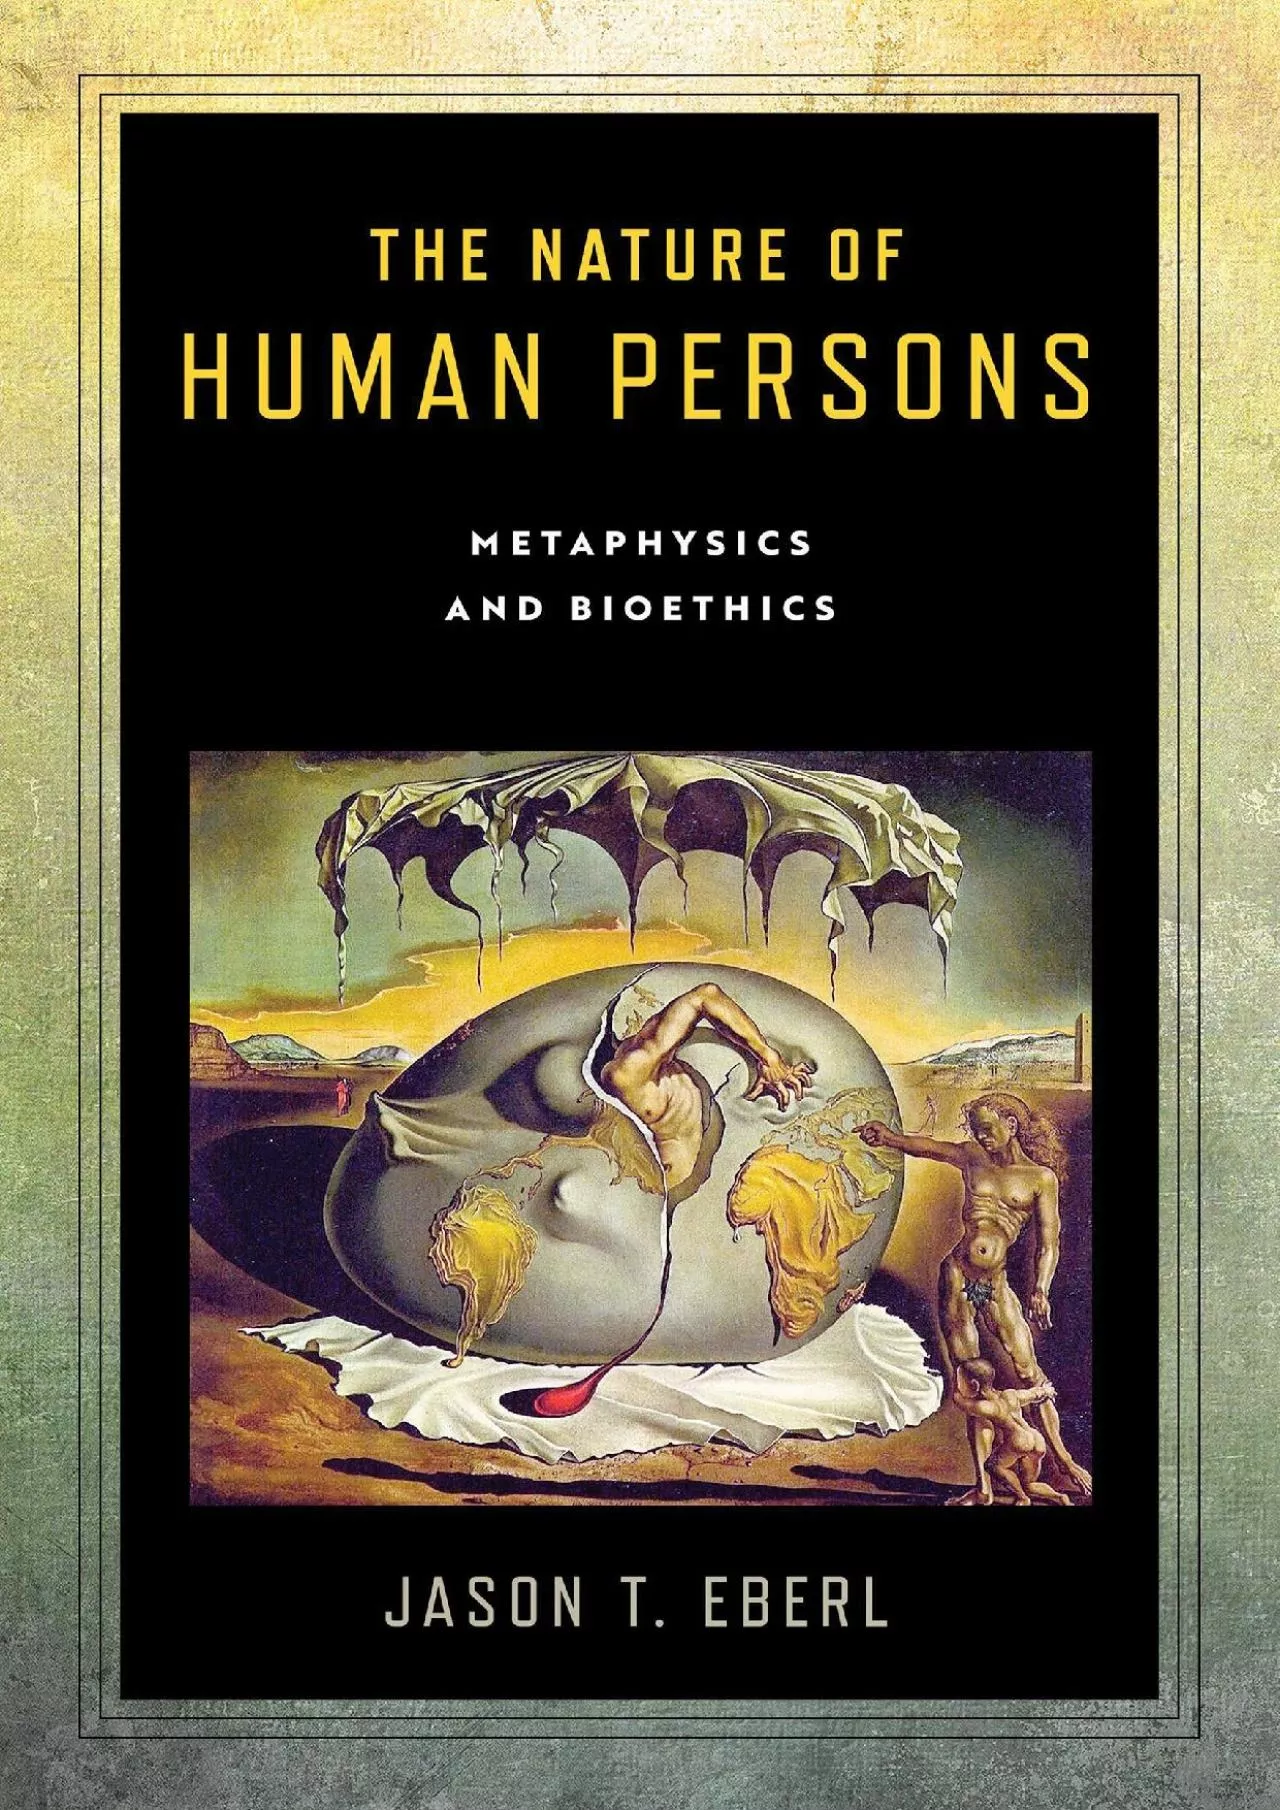 (EBOOK)-The Nature of Human Persons: Metaphysics and Bioethics (Notre Dame Studies in